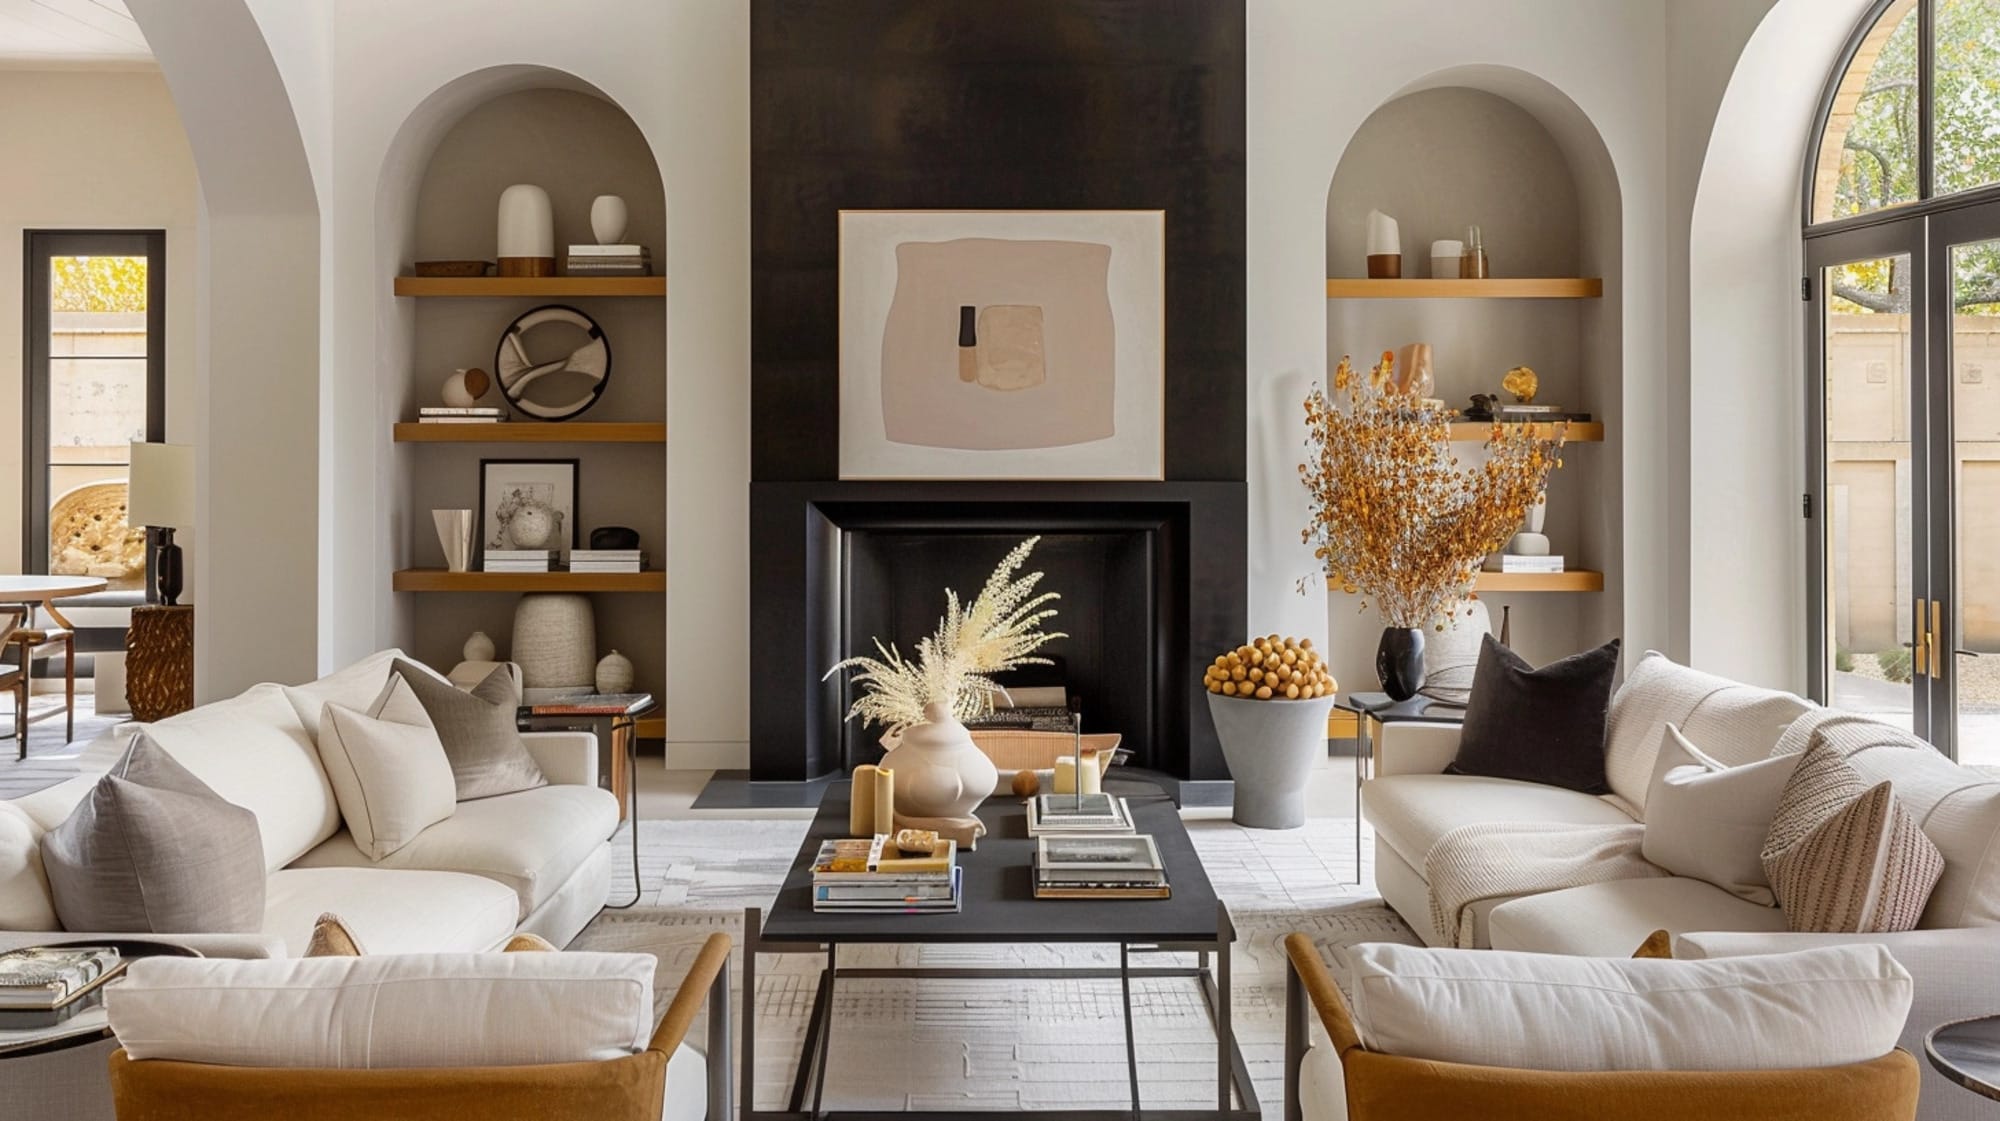 9 Best Types of Art for a Curated Home